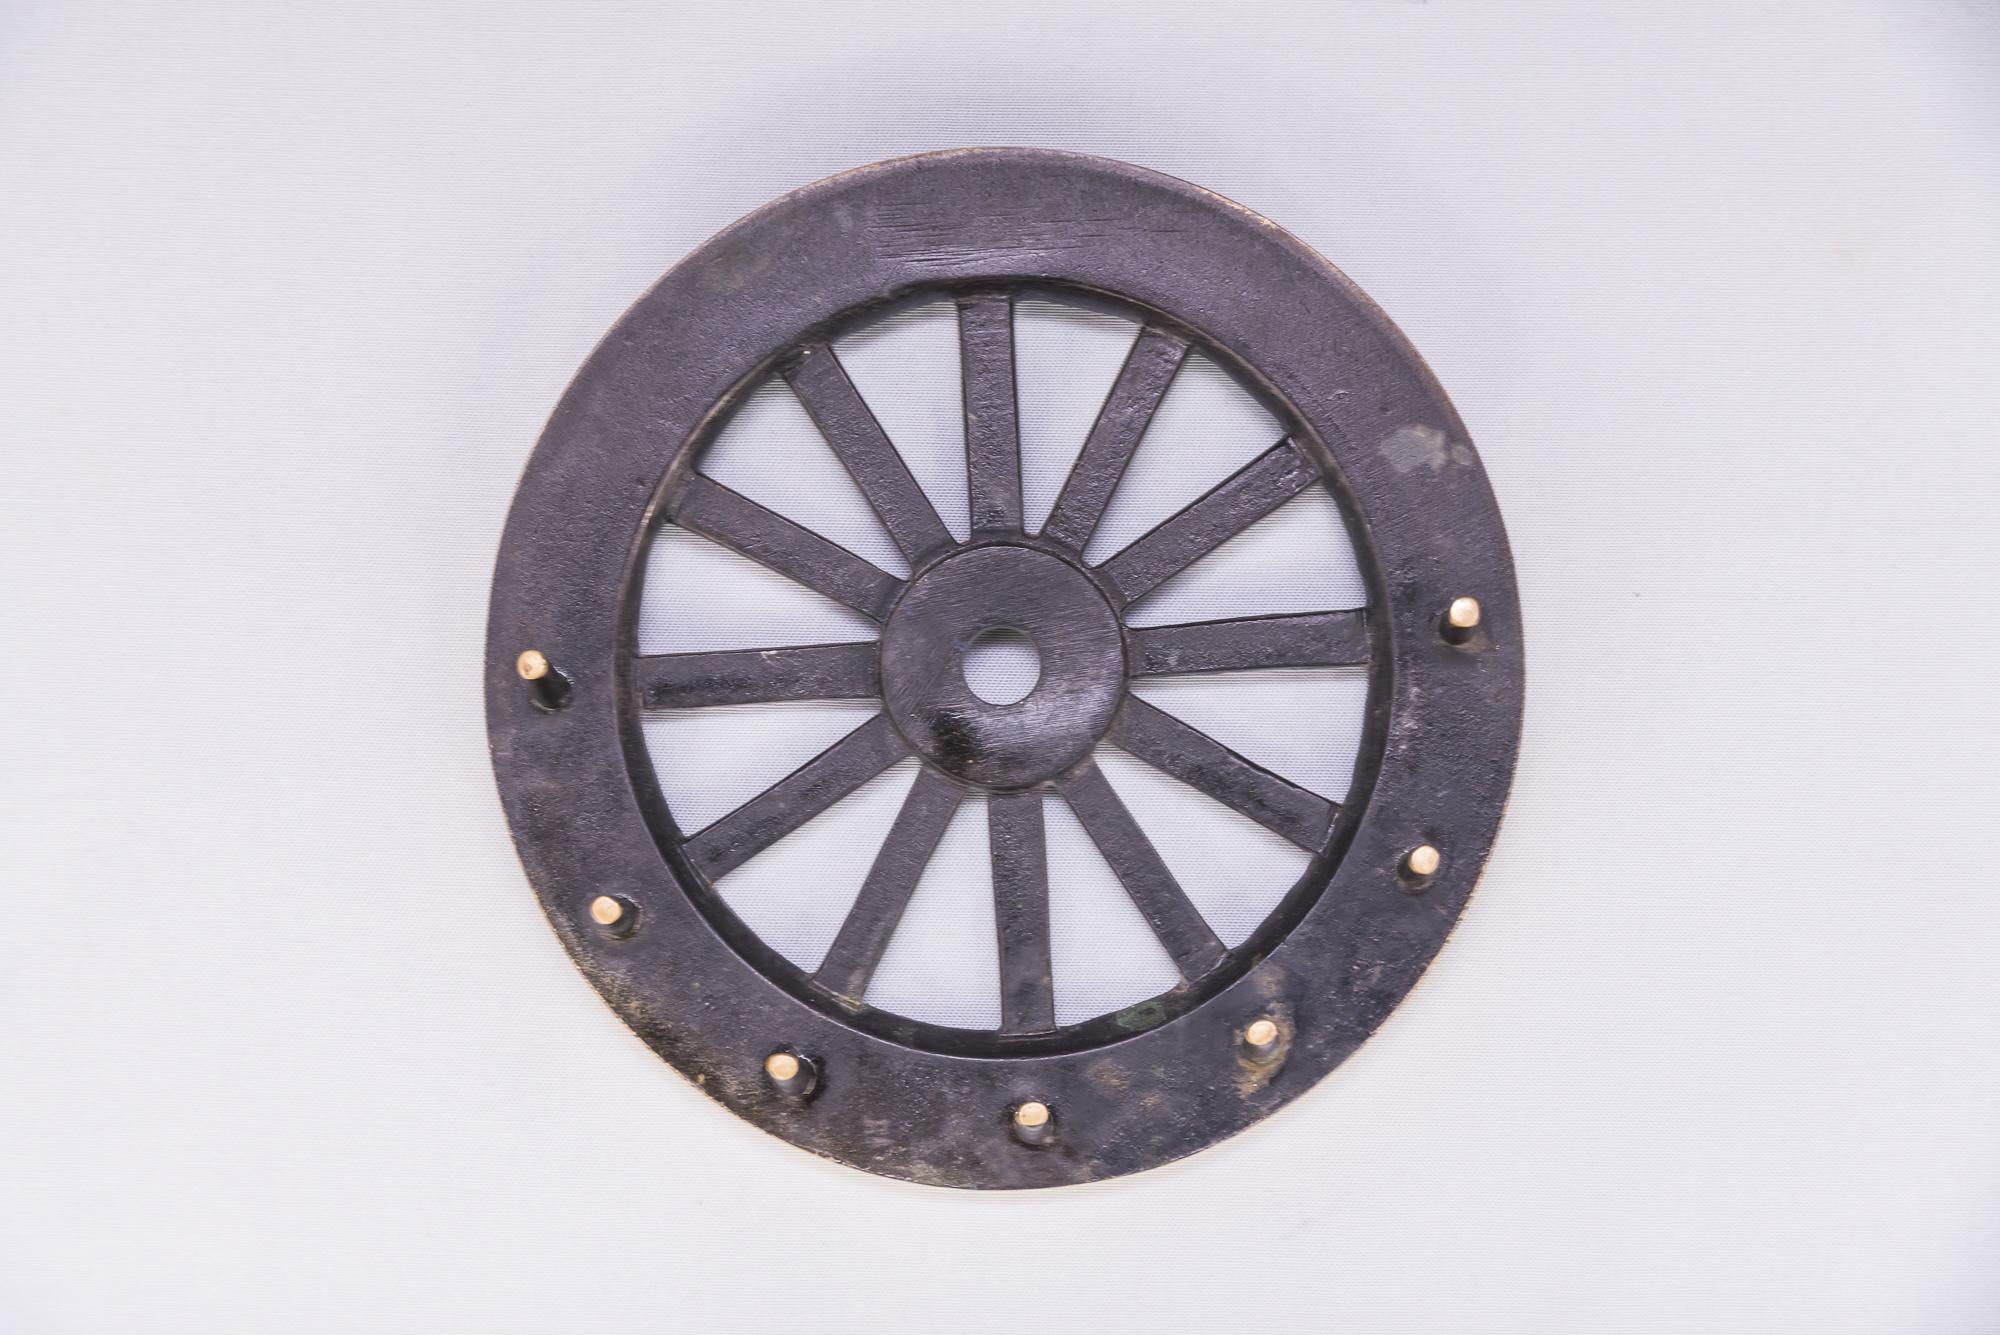 Mid-Century Modern Key Holder in a Style of a Wheel by Walter Bosse, circa 1950s For Sale